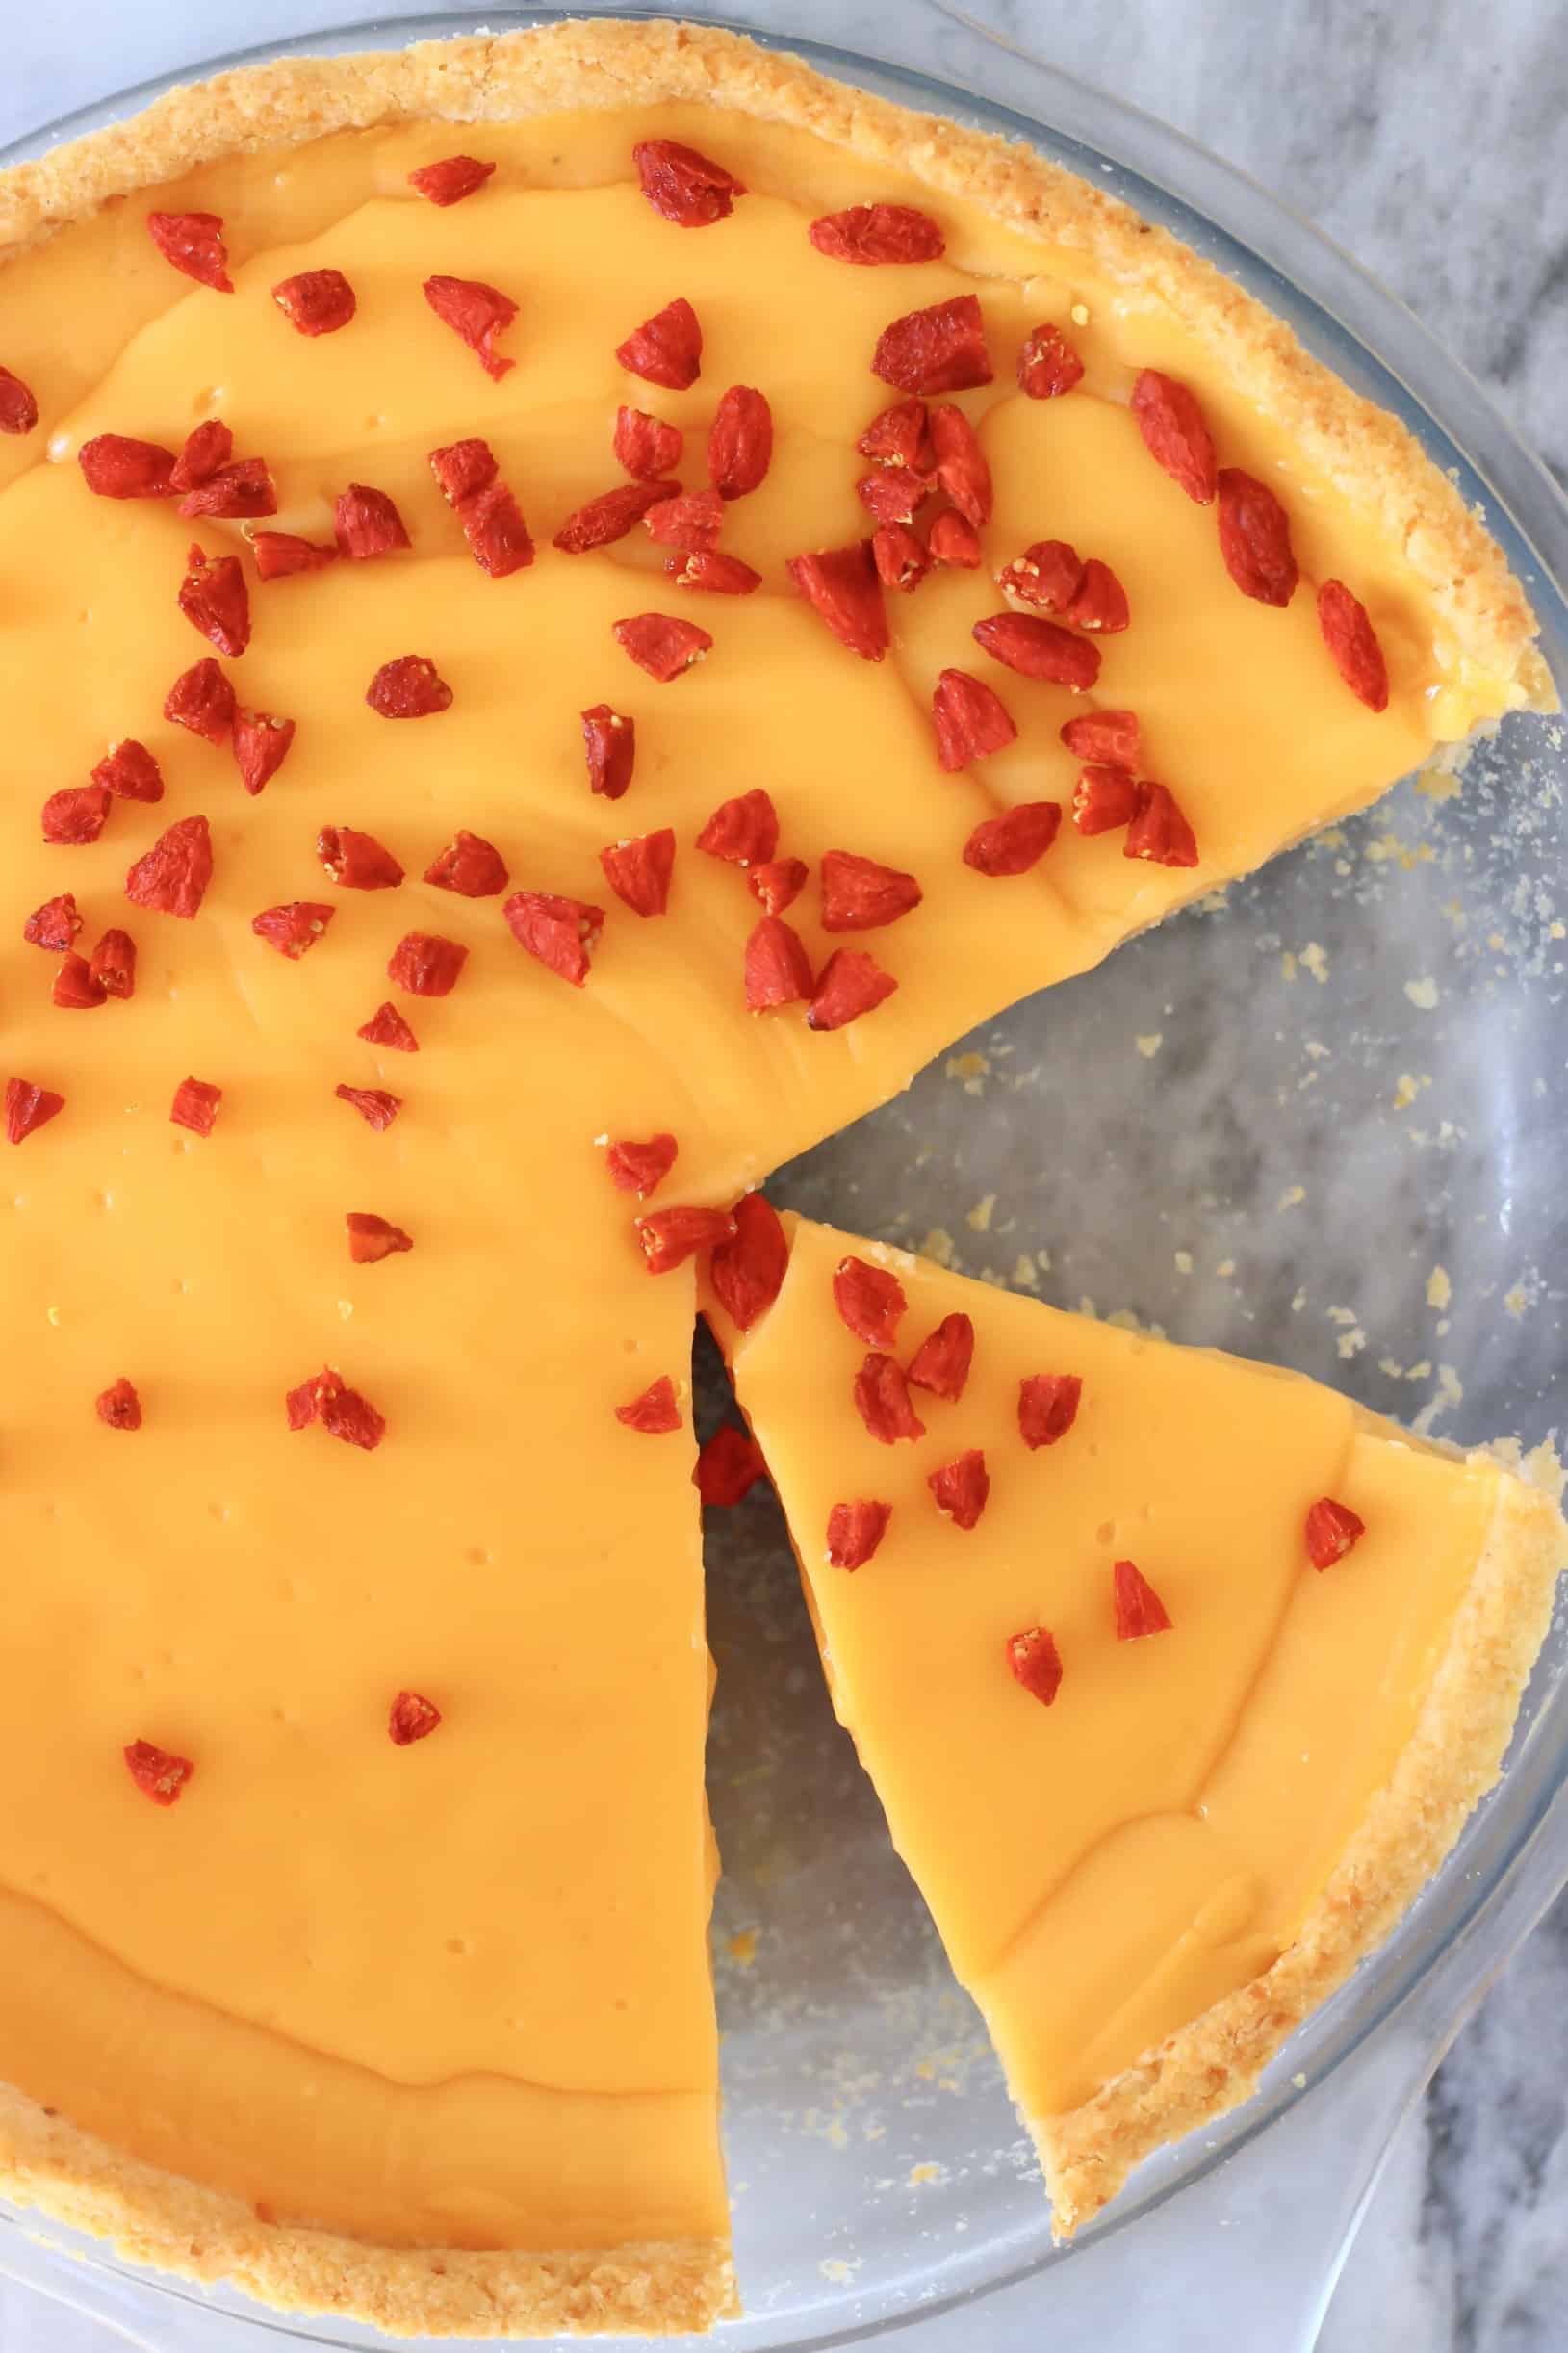 Gluten-free vegan lemon tart topped with goji berries with a slice taken out of it